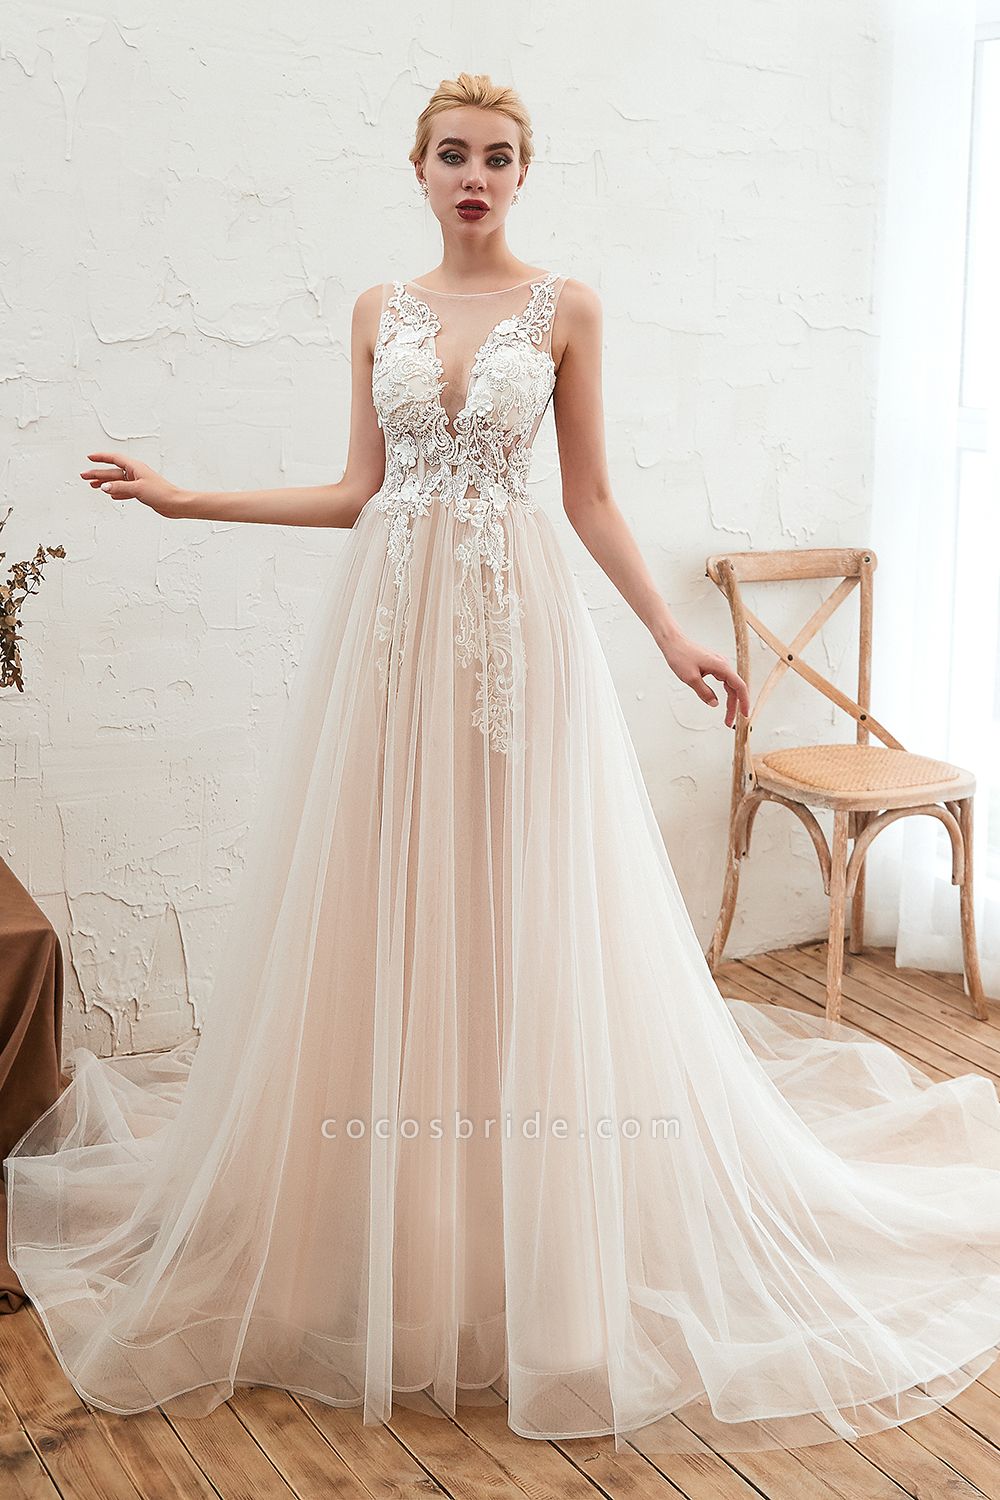 Delicate A-line Bateau Tulle Open Back Wedding Dress With Floral Lace